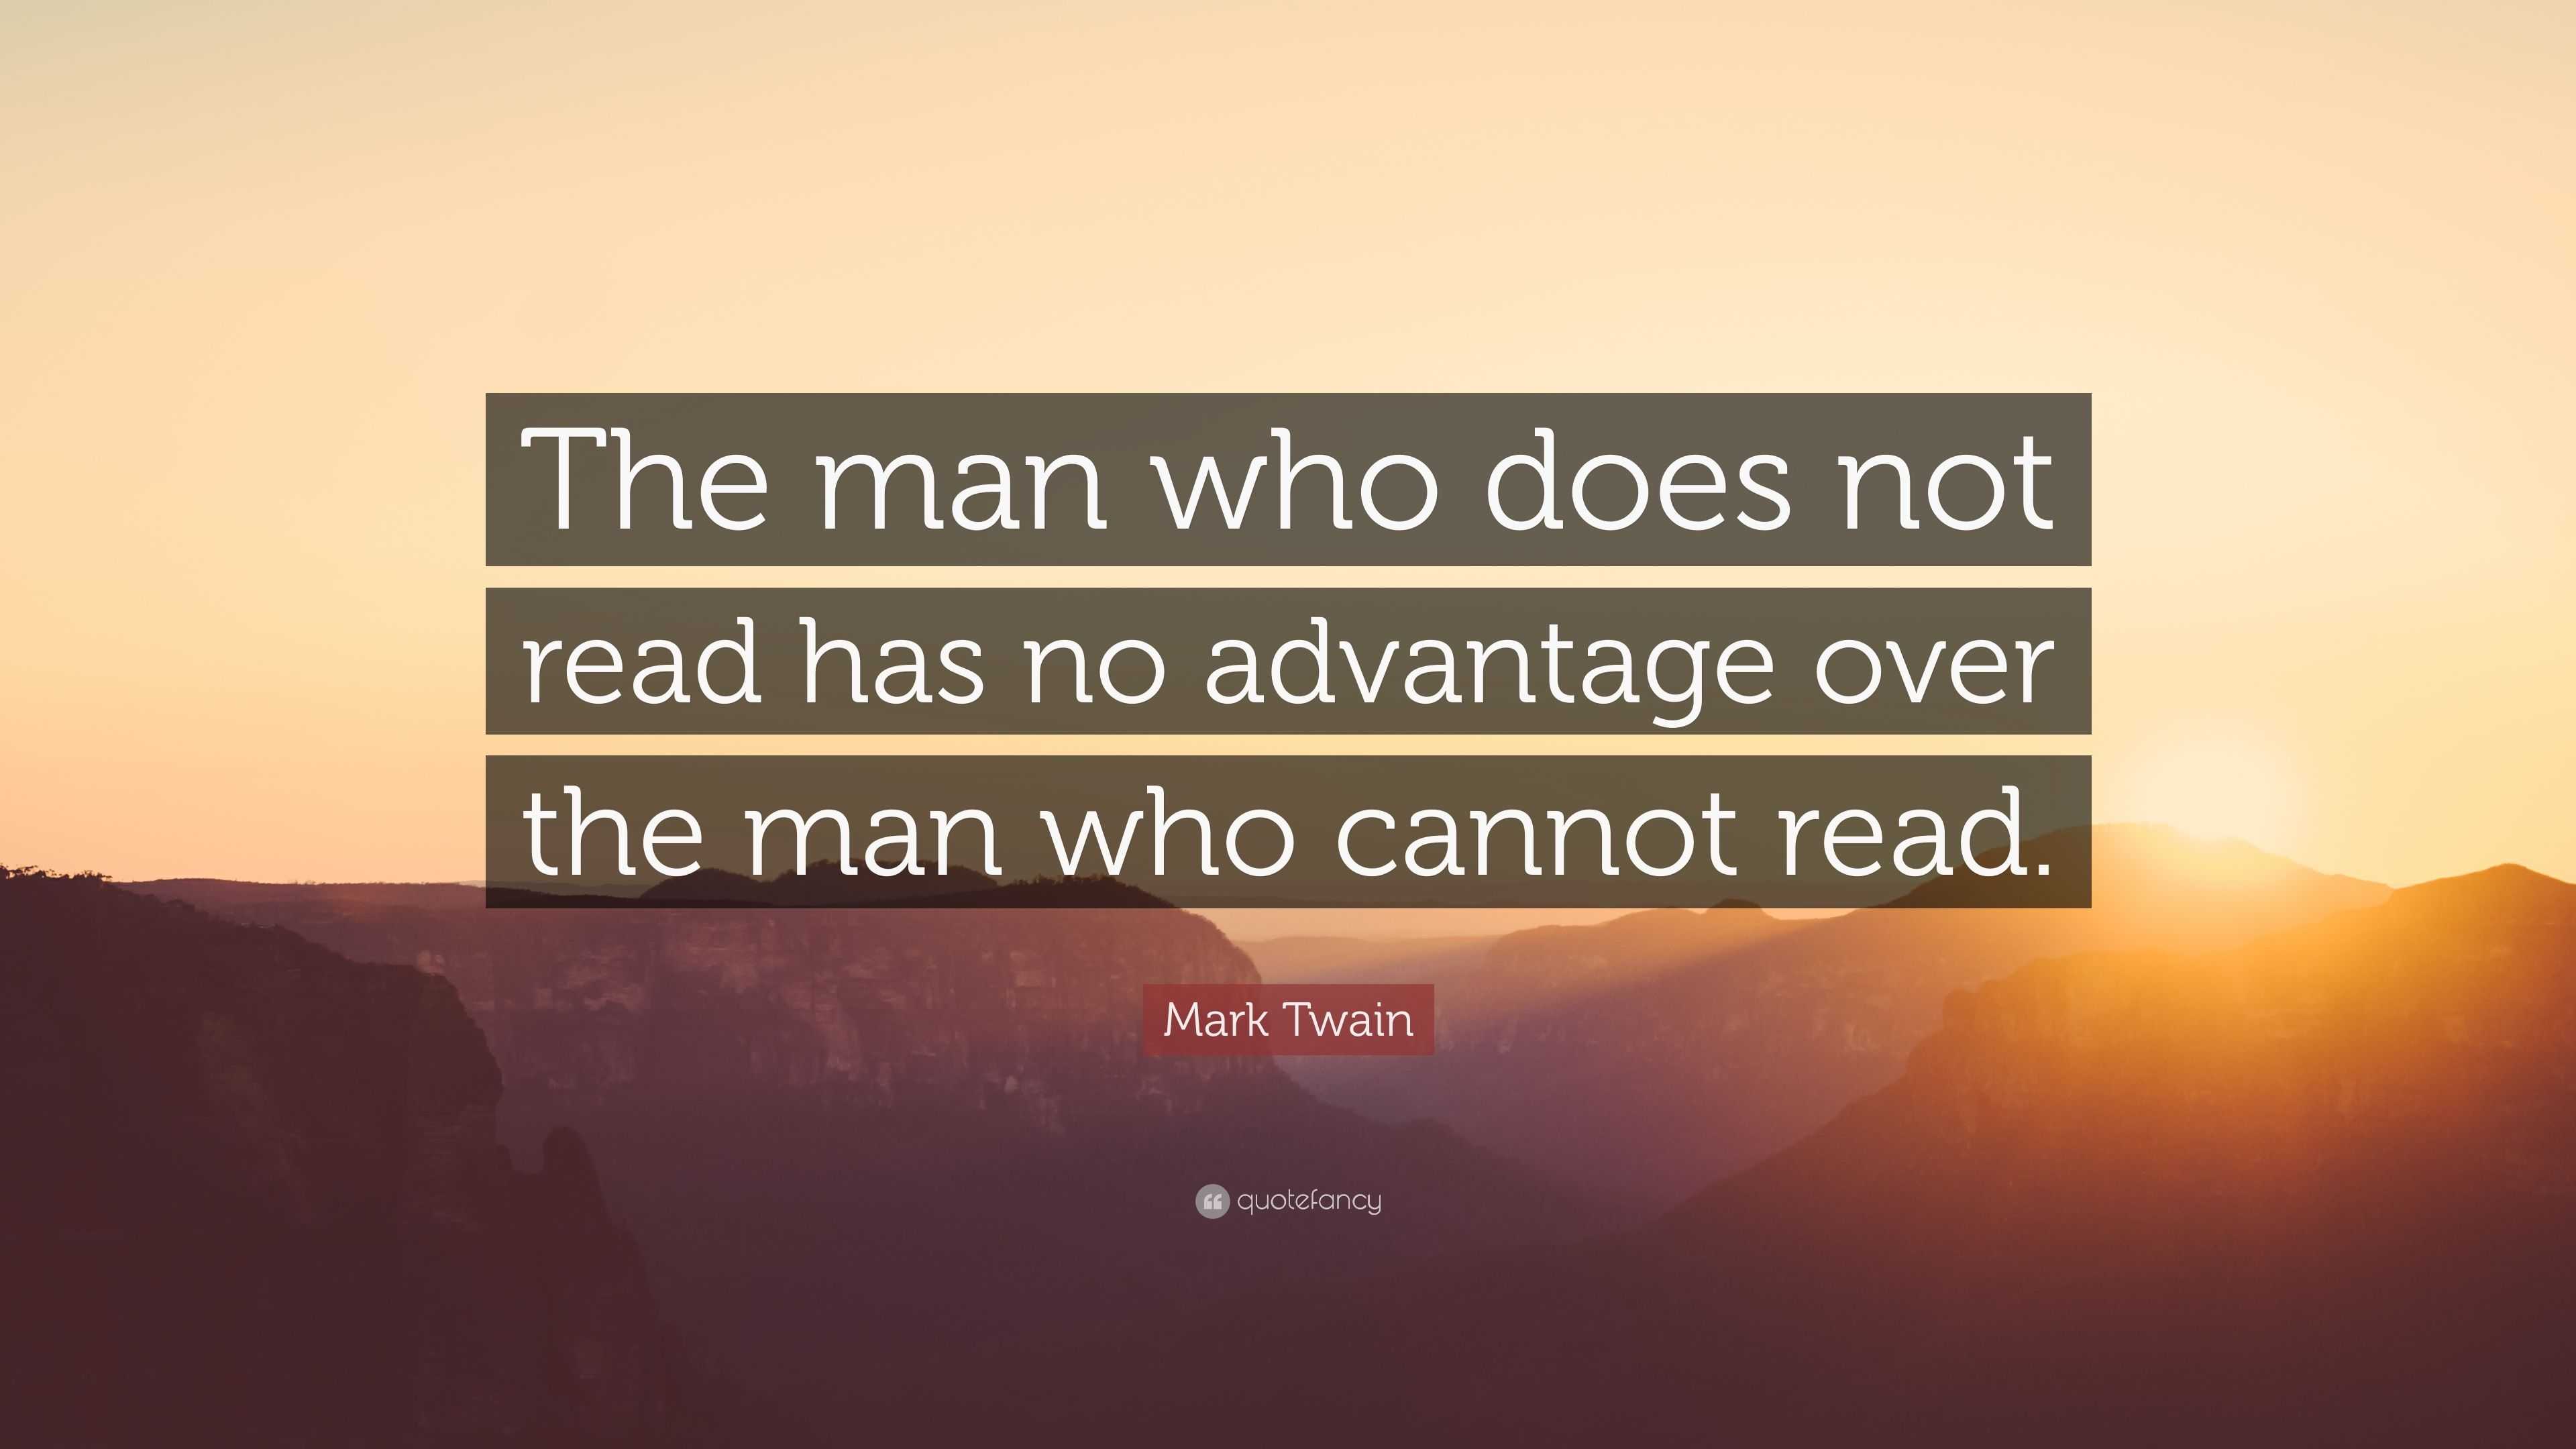 Mark Twain Quote: “The man who does not read has no advantage over the ...